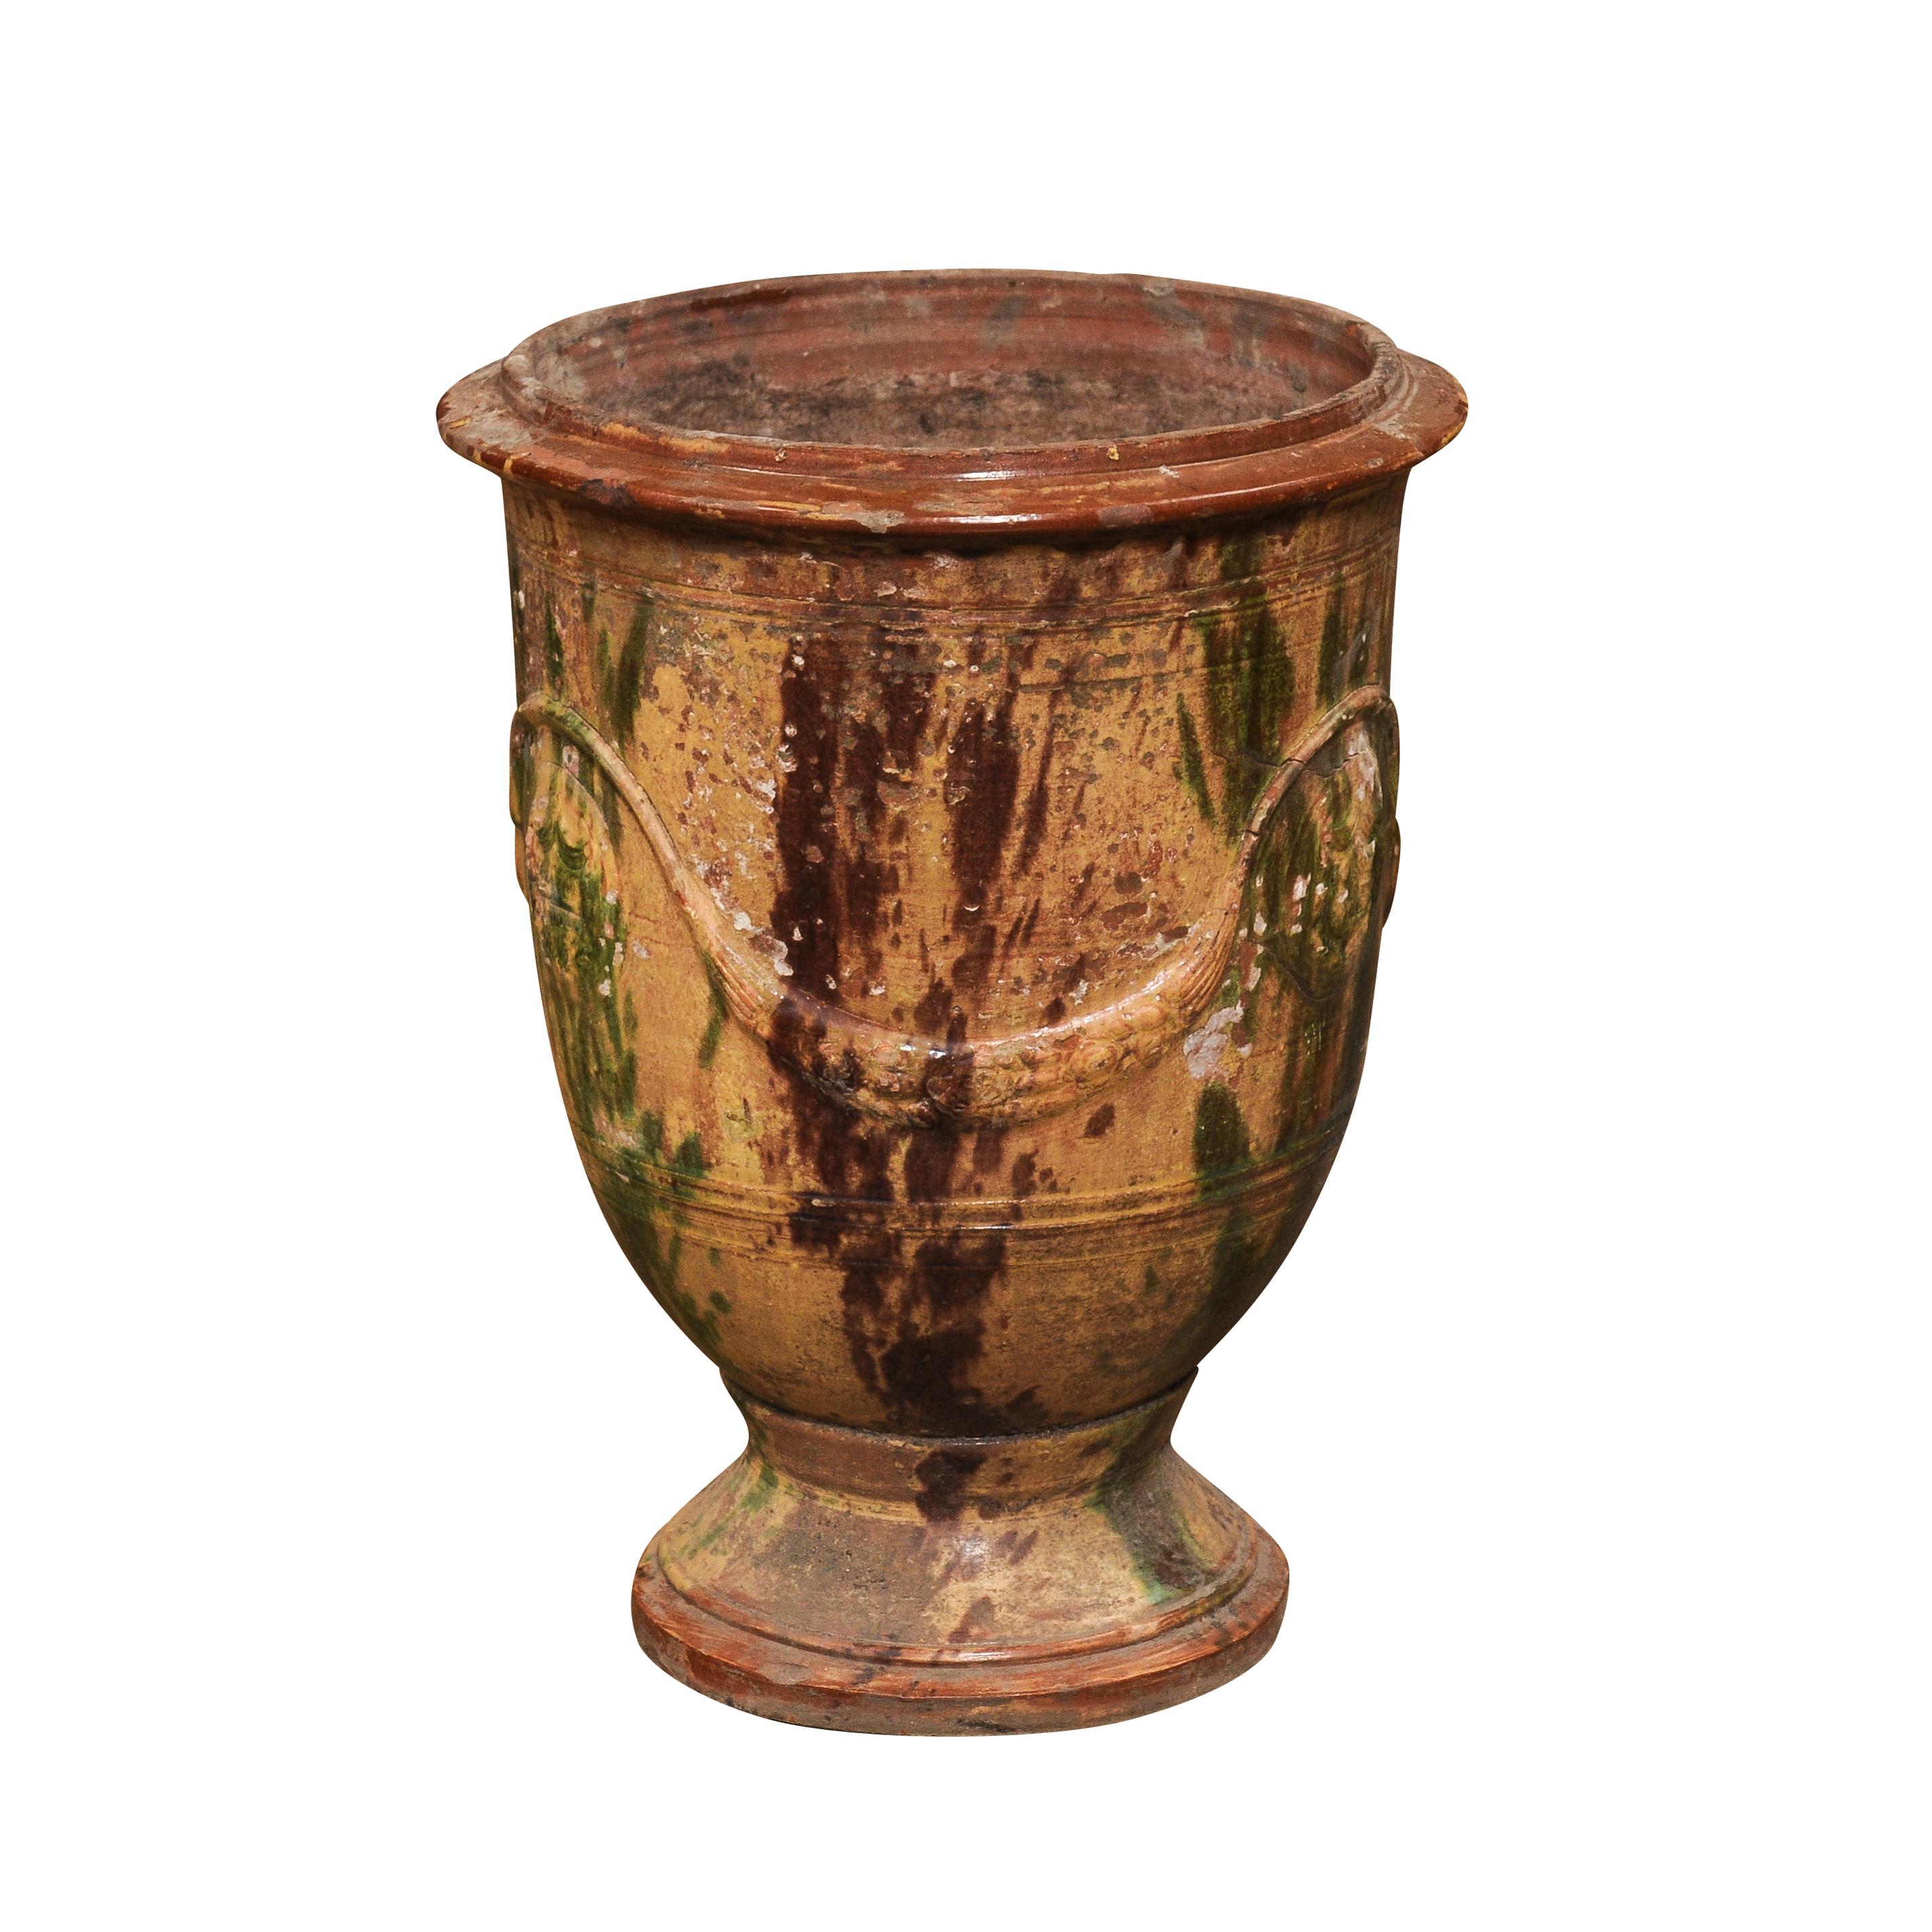 A large French Anduze Boisset jar from the 19th century with dark brown and green drip glaze and swag decoration in raised relief. Imbued with an aura of rustic elegance and traditional craftsmanship, this large French Anduze jar hailing from the